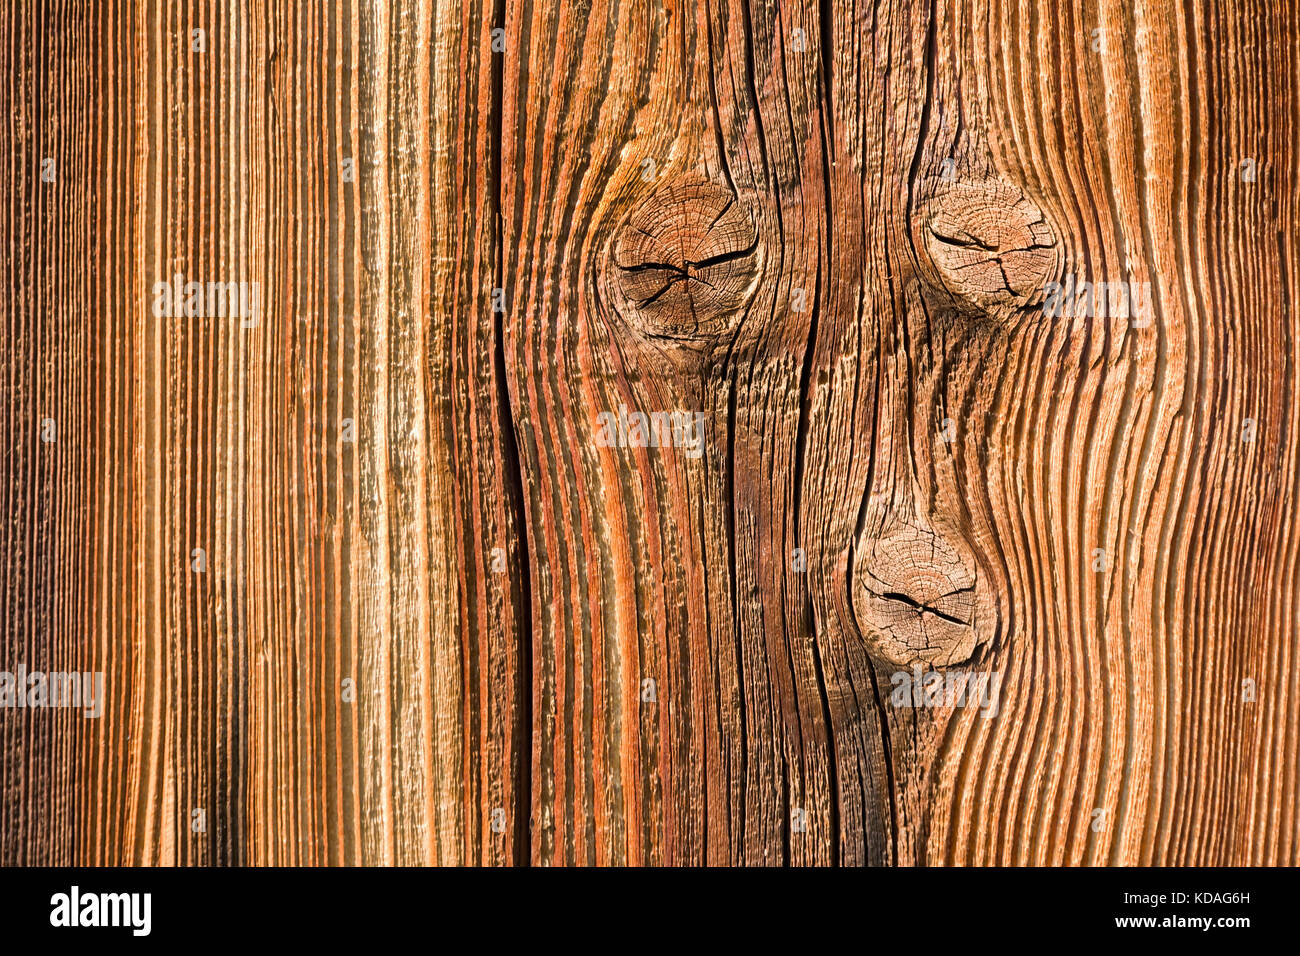 Fragment of an old wooden board with knots. Background. Stock Photo